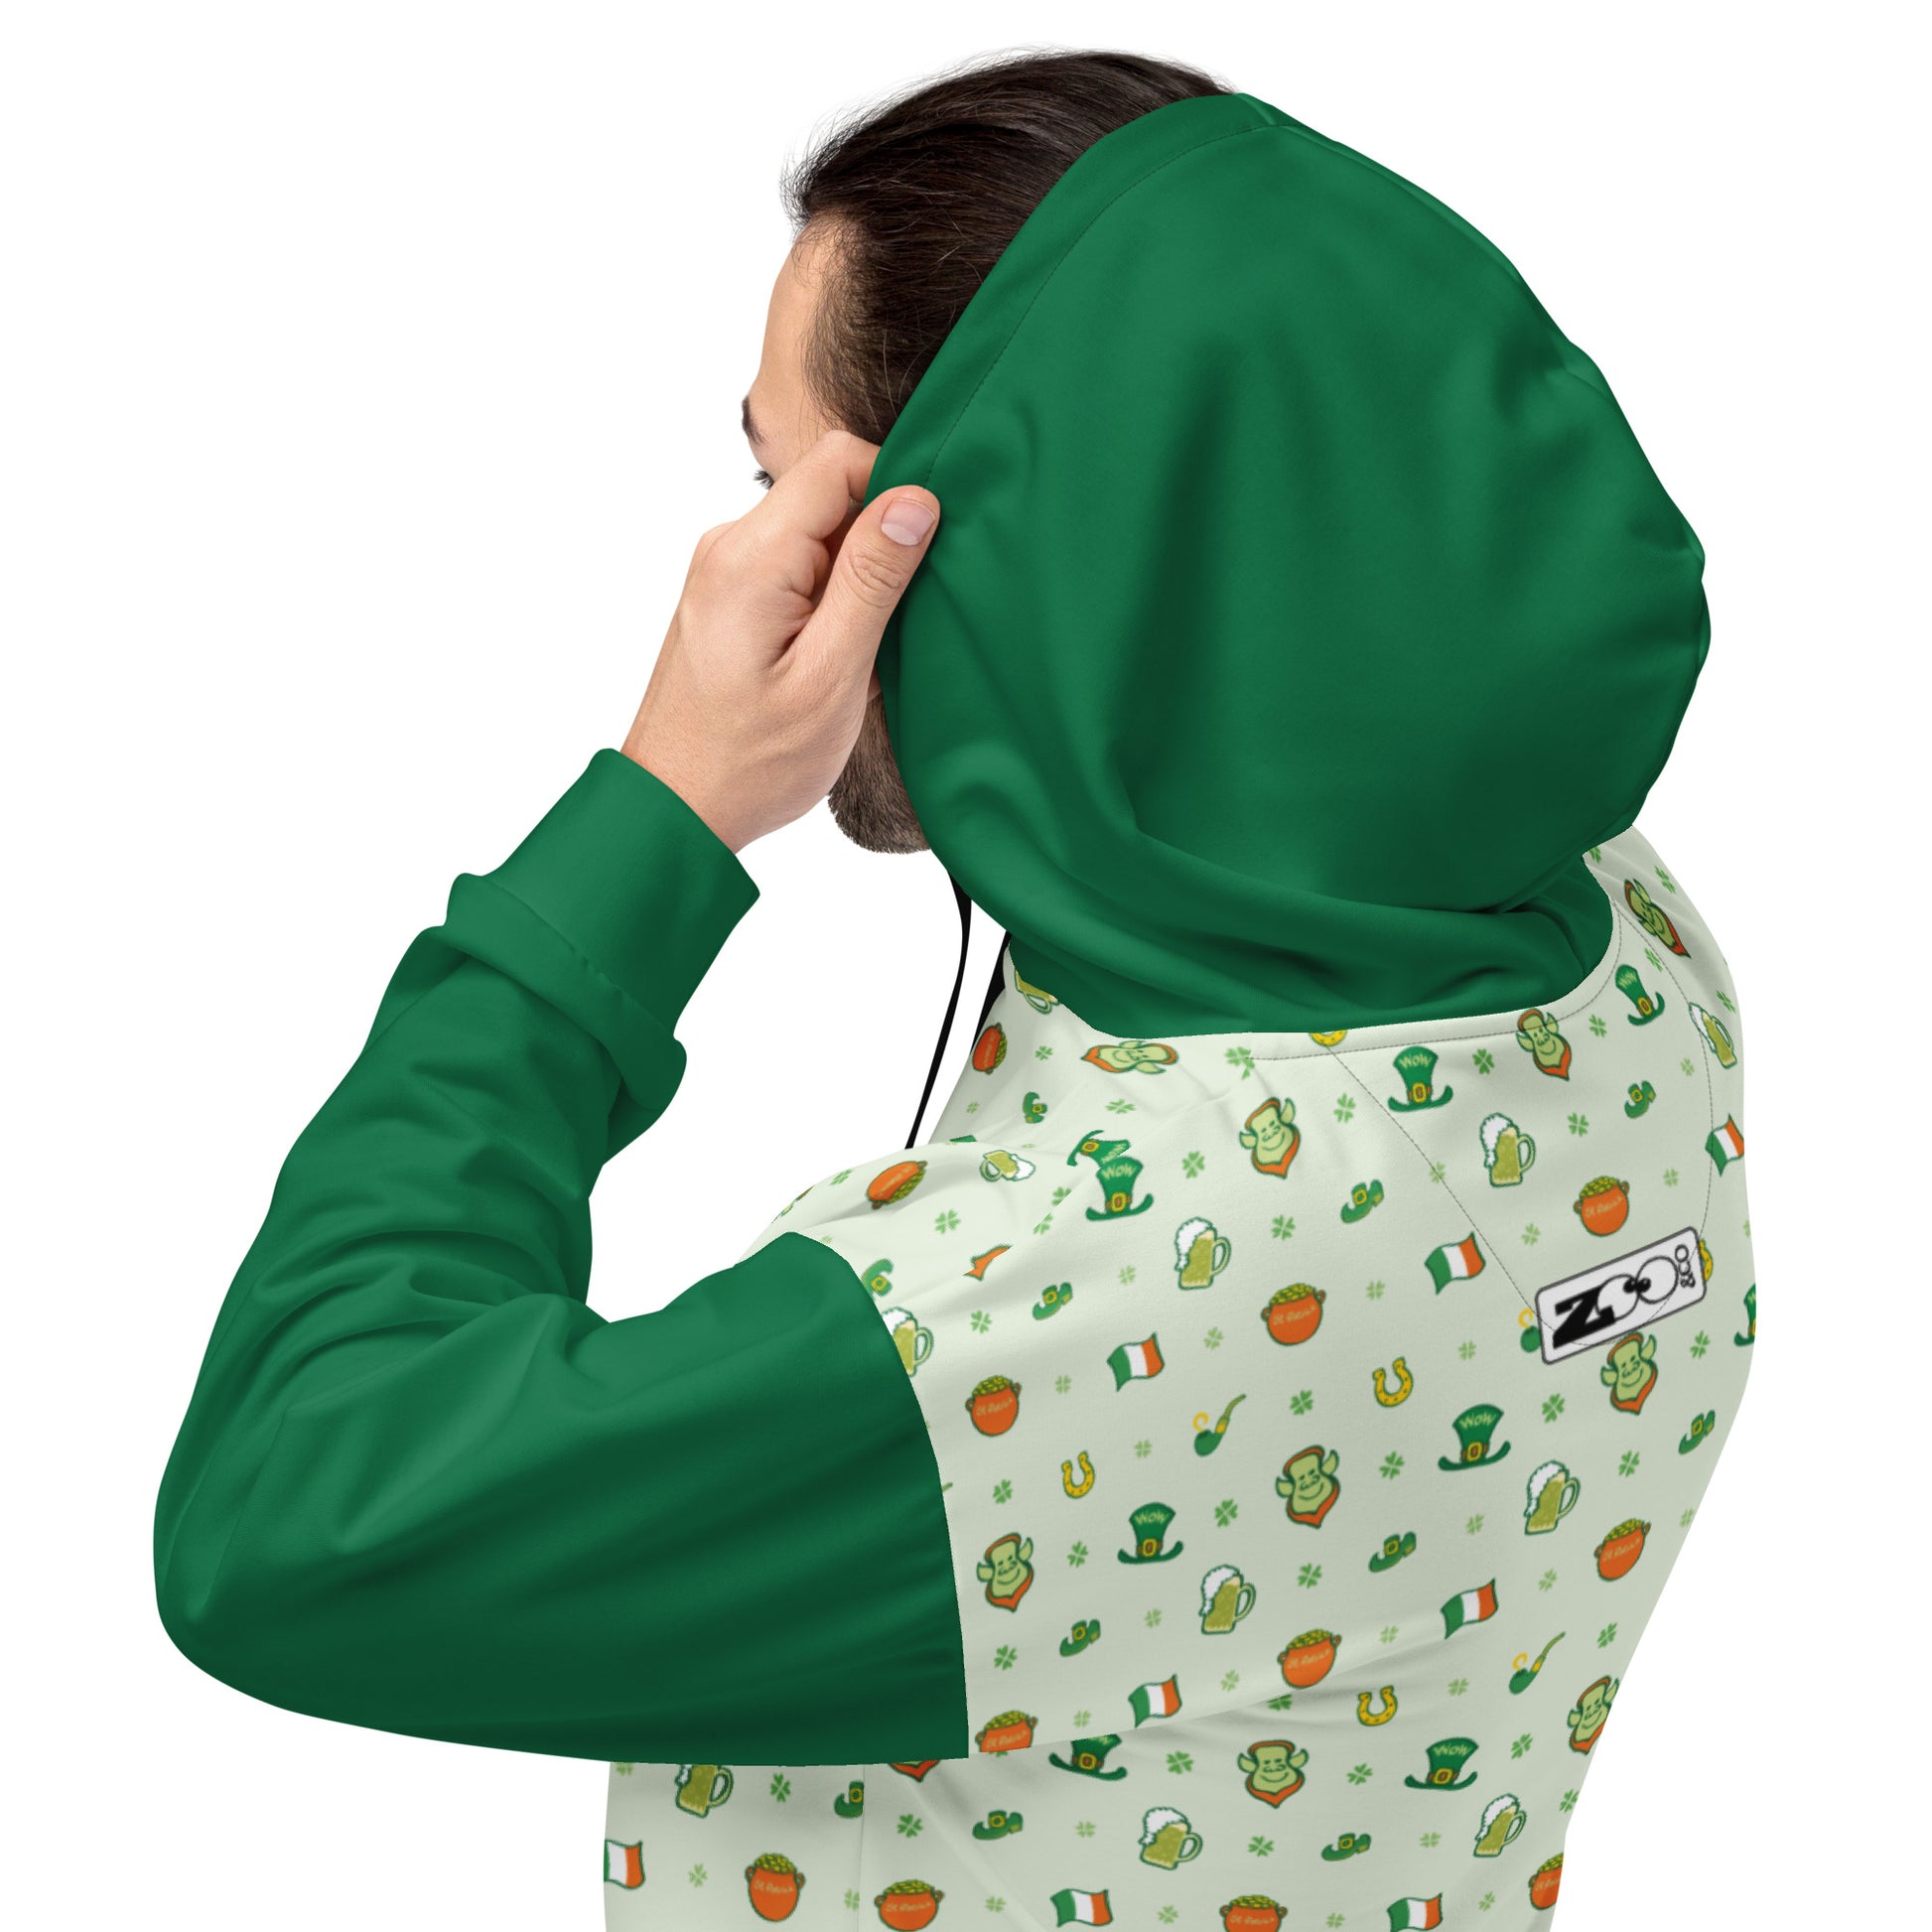 Celebrate Saint Patrick's Day in style Unisex Hoodie. Product details